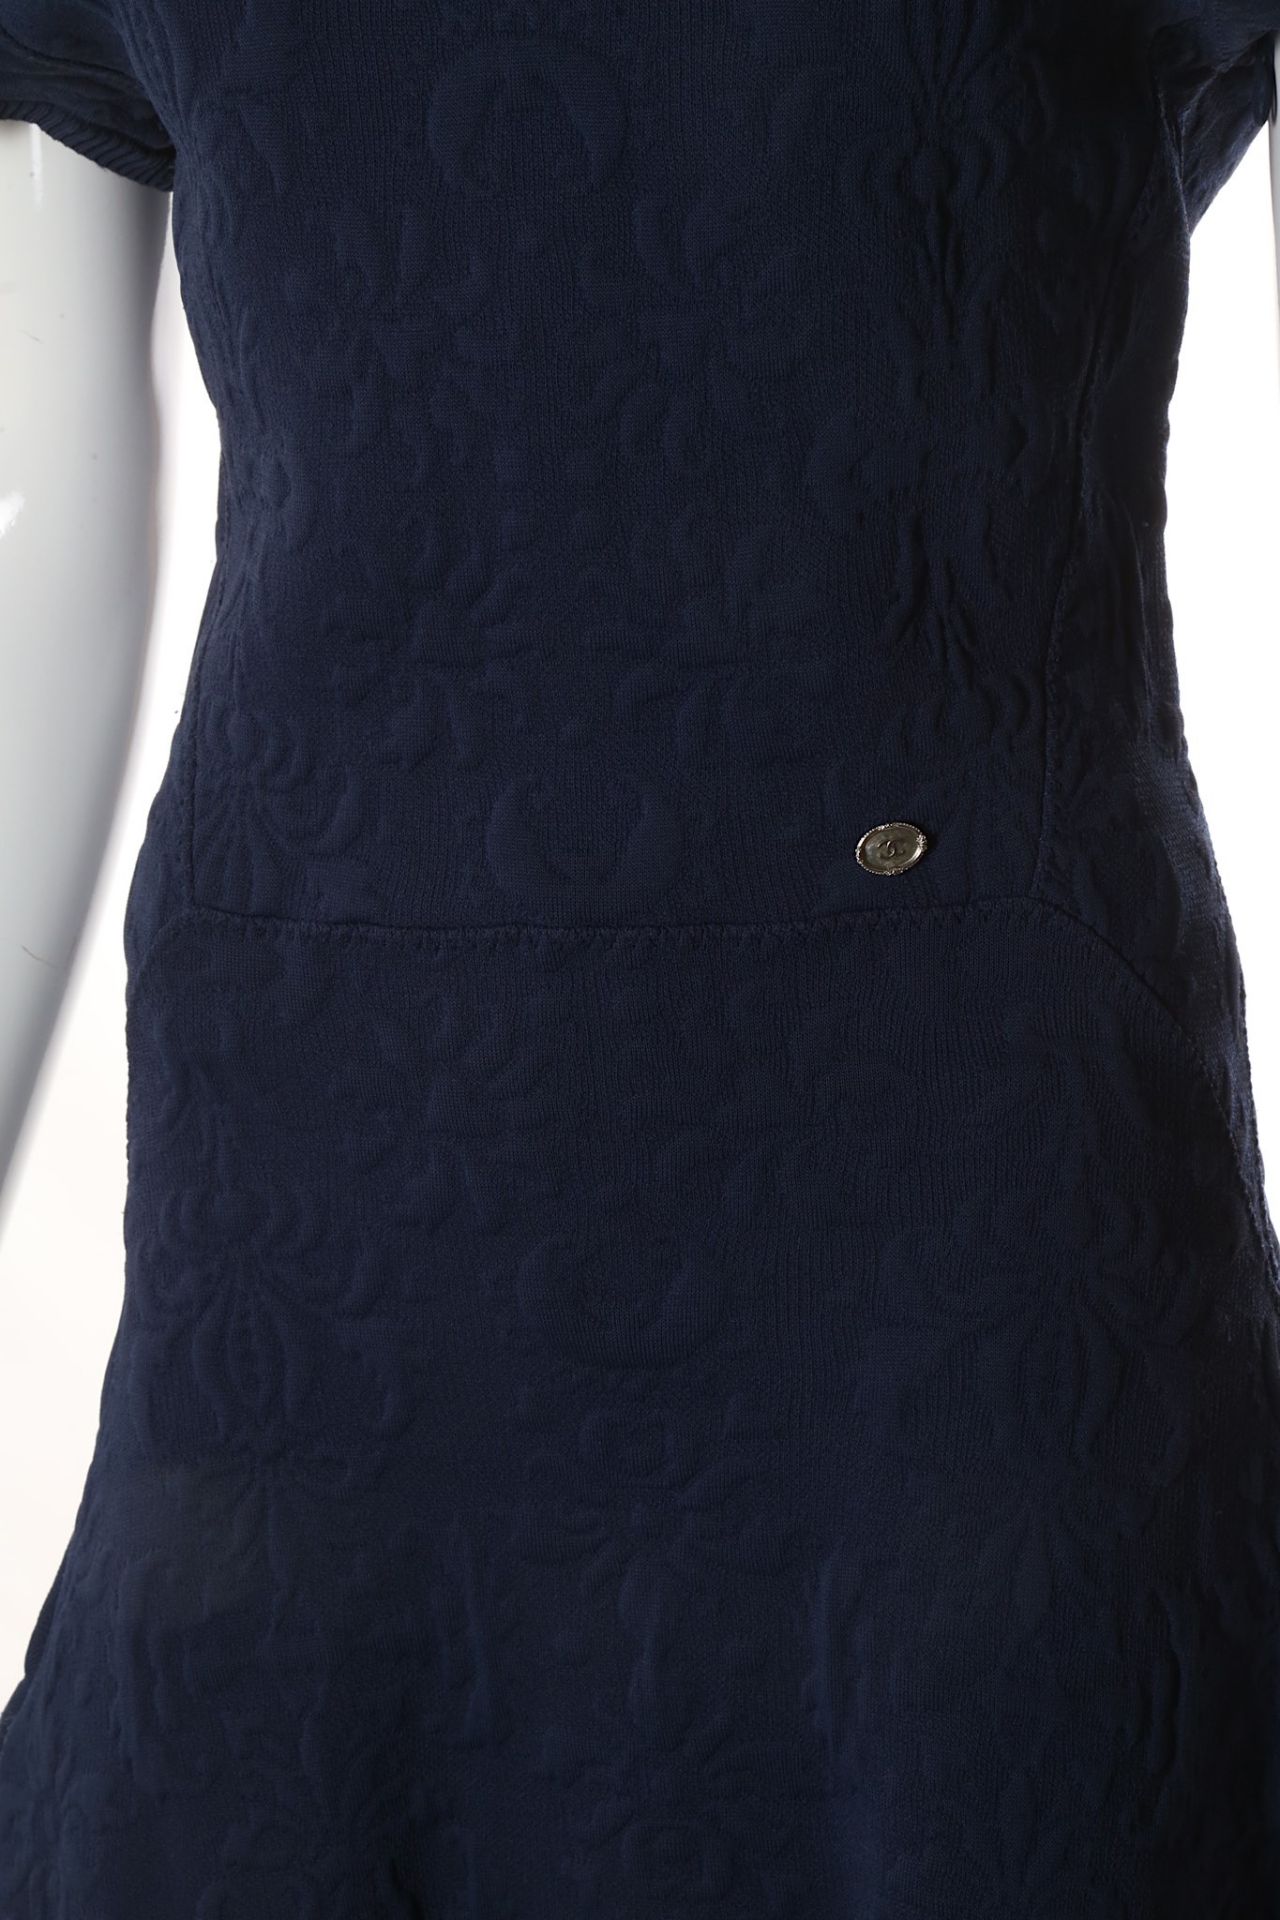 Chanel Navy Blue Jacket and Dress, 2010s, raised b - Image 3 of 7